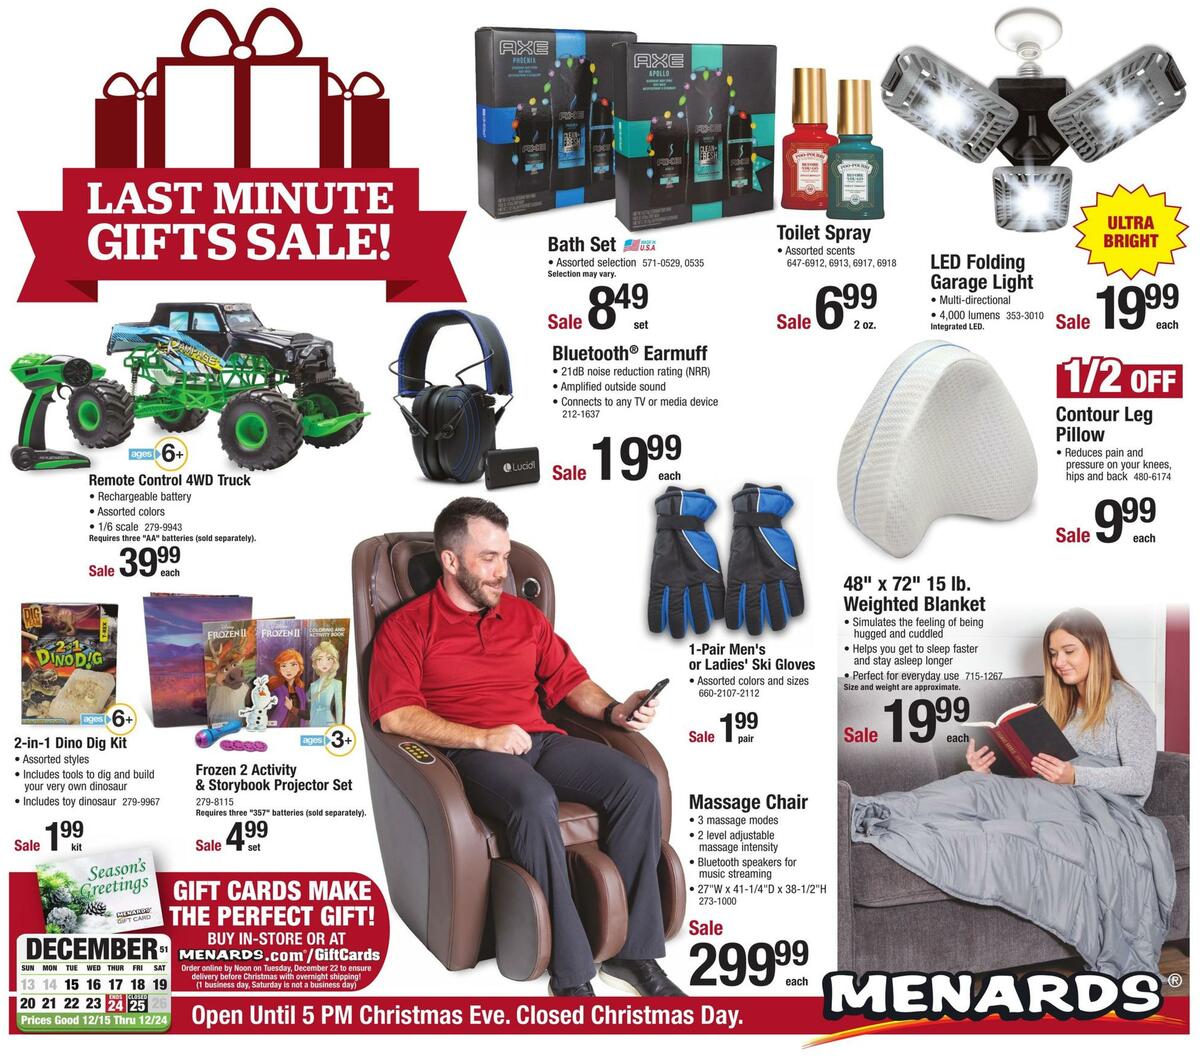 Menards Last Minute Gift Sale Weekly Ads & Special Buys from December 15